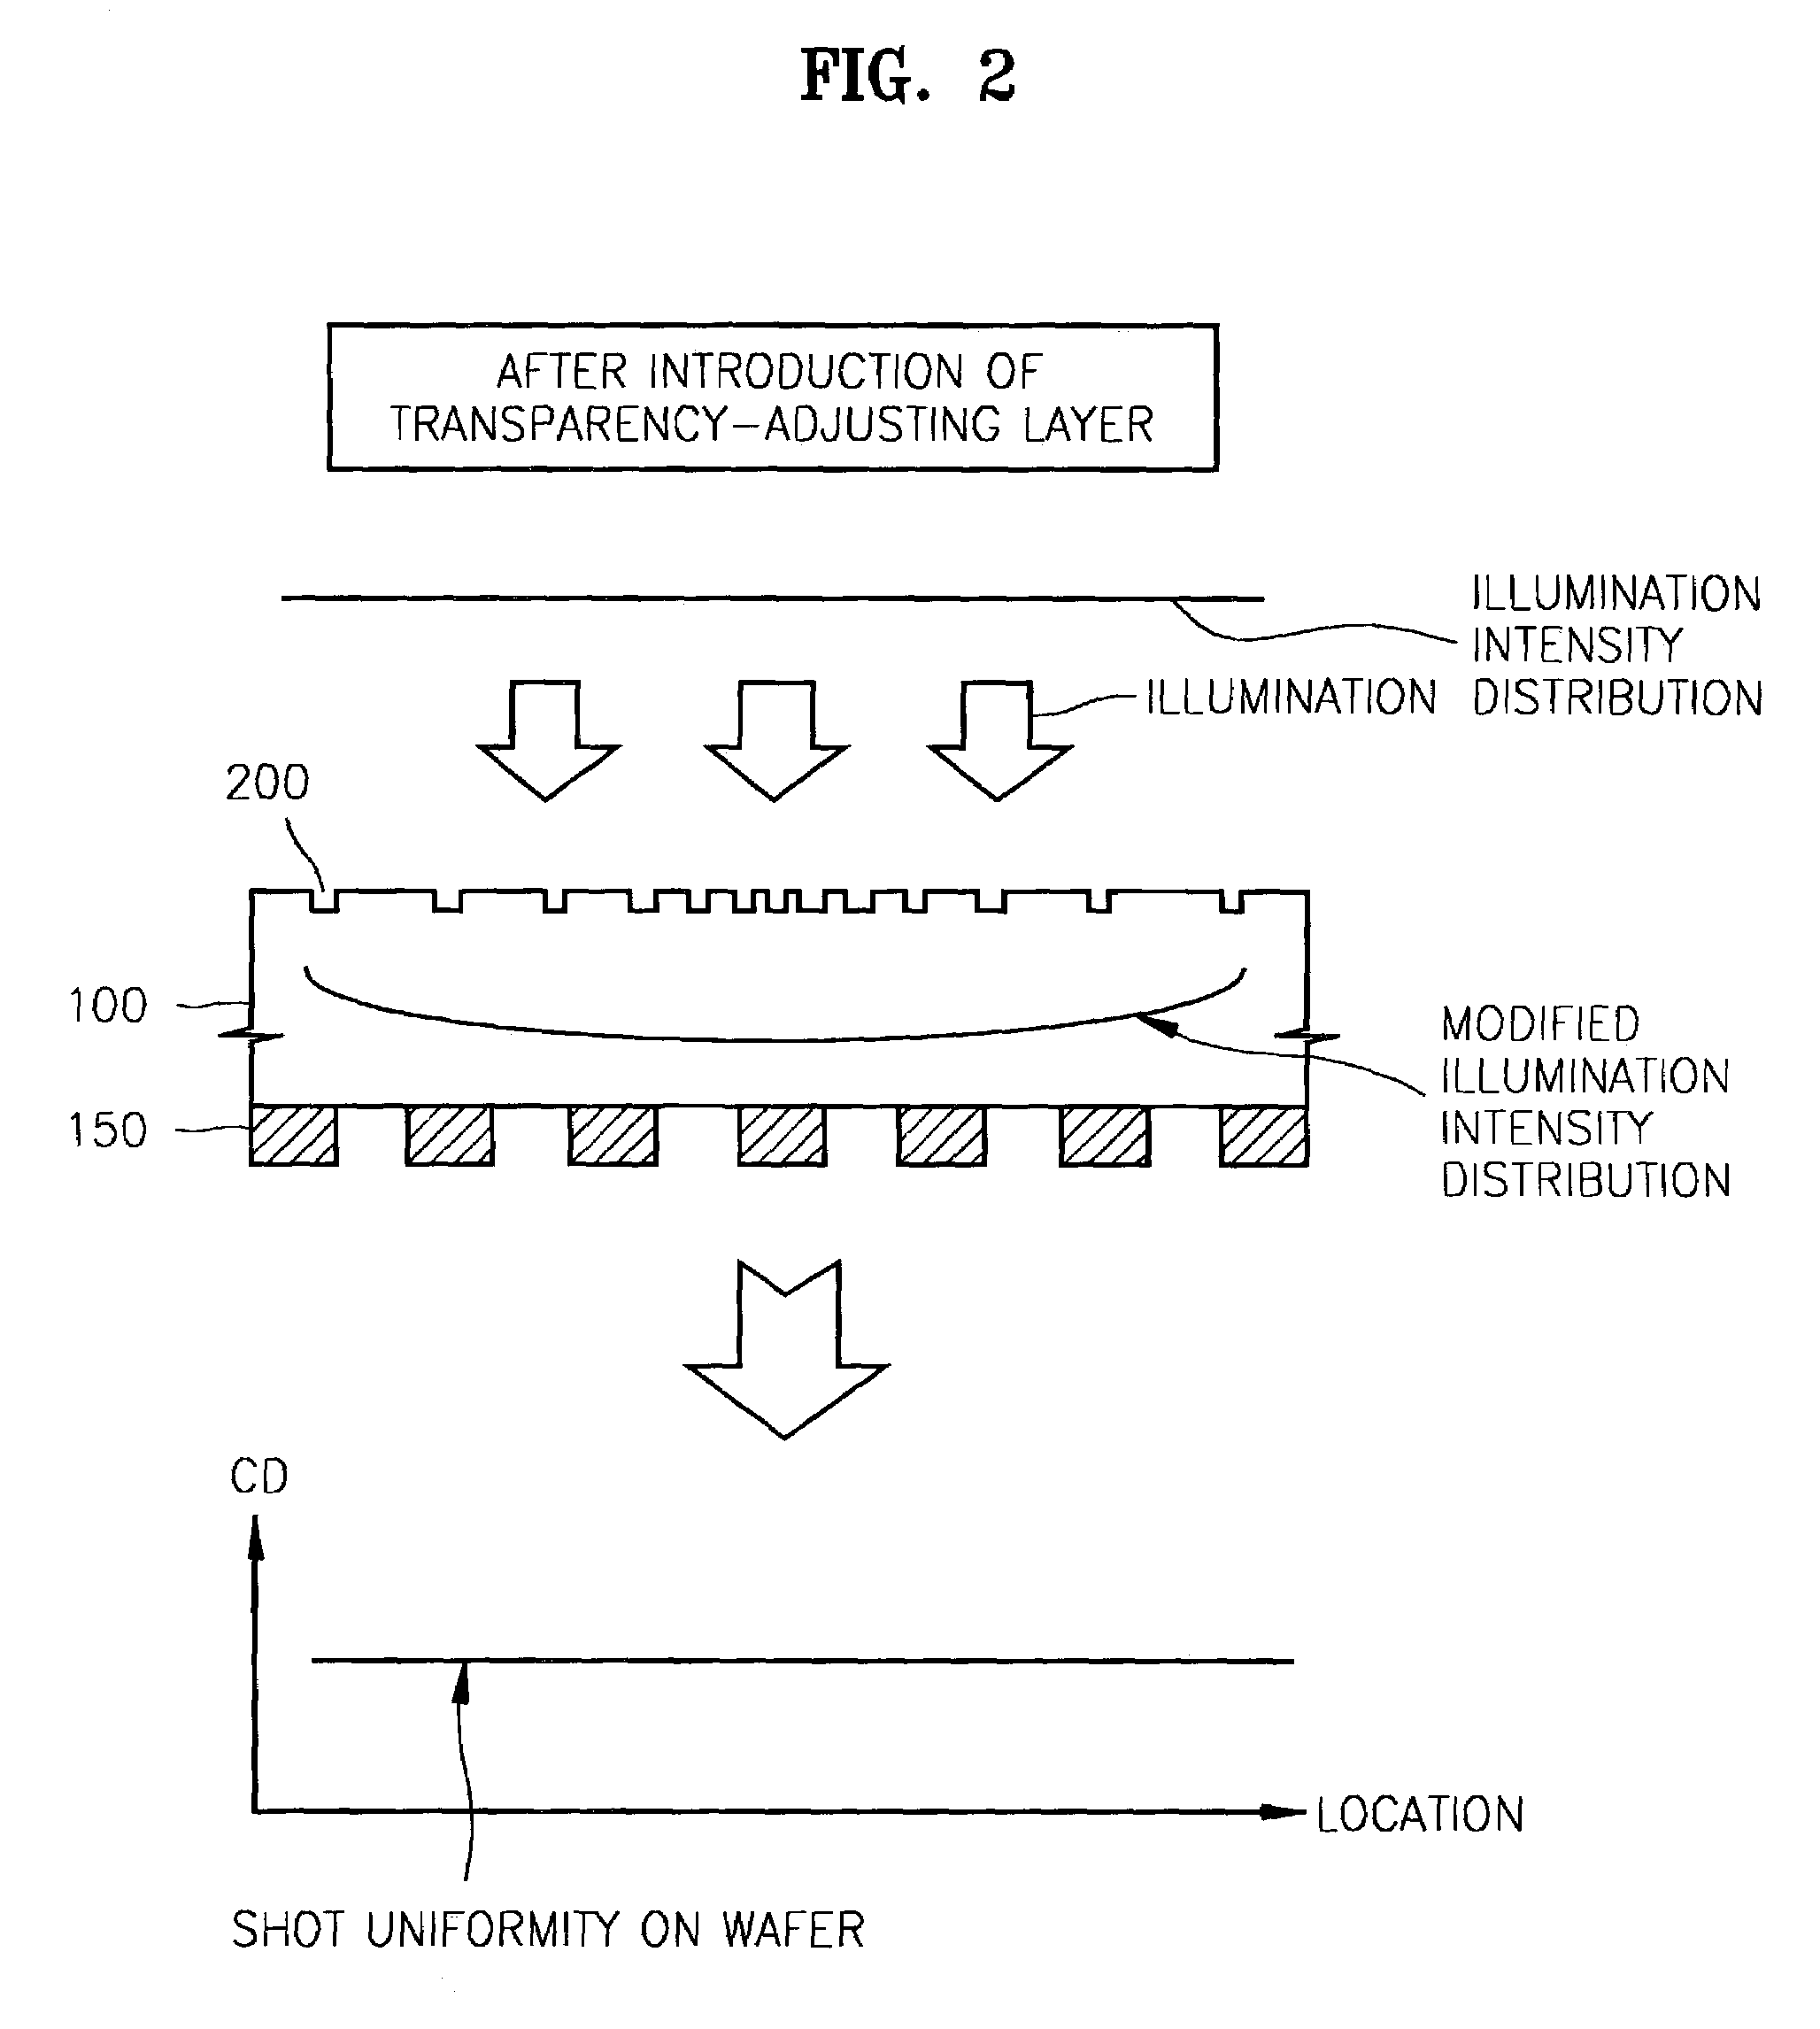 Photomask having a transparency-adjusting layer, method of manufacturing the photomask, and exposure method using the photomask